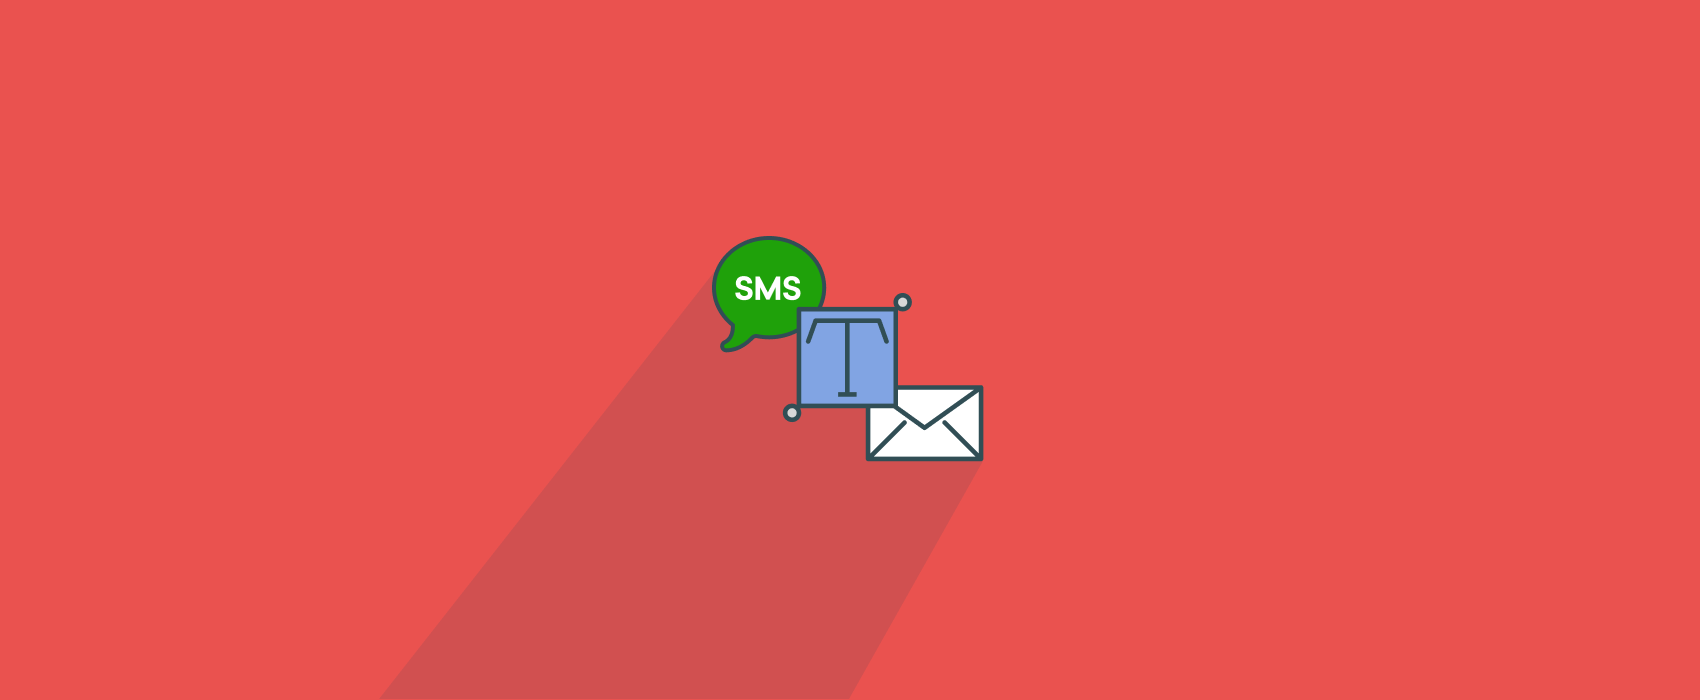 The Differences Between SMS and Email Marketing - Klaviyo Blog